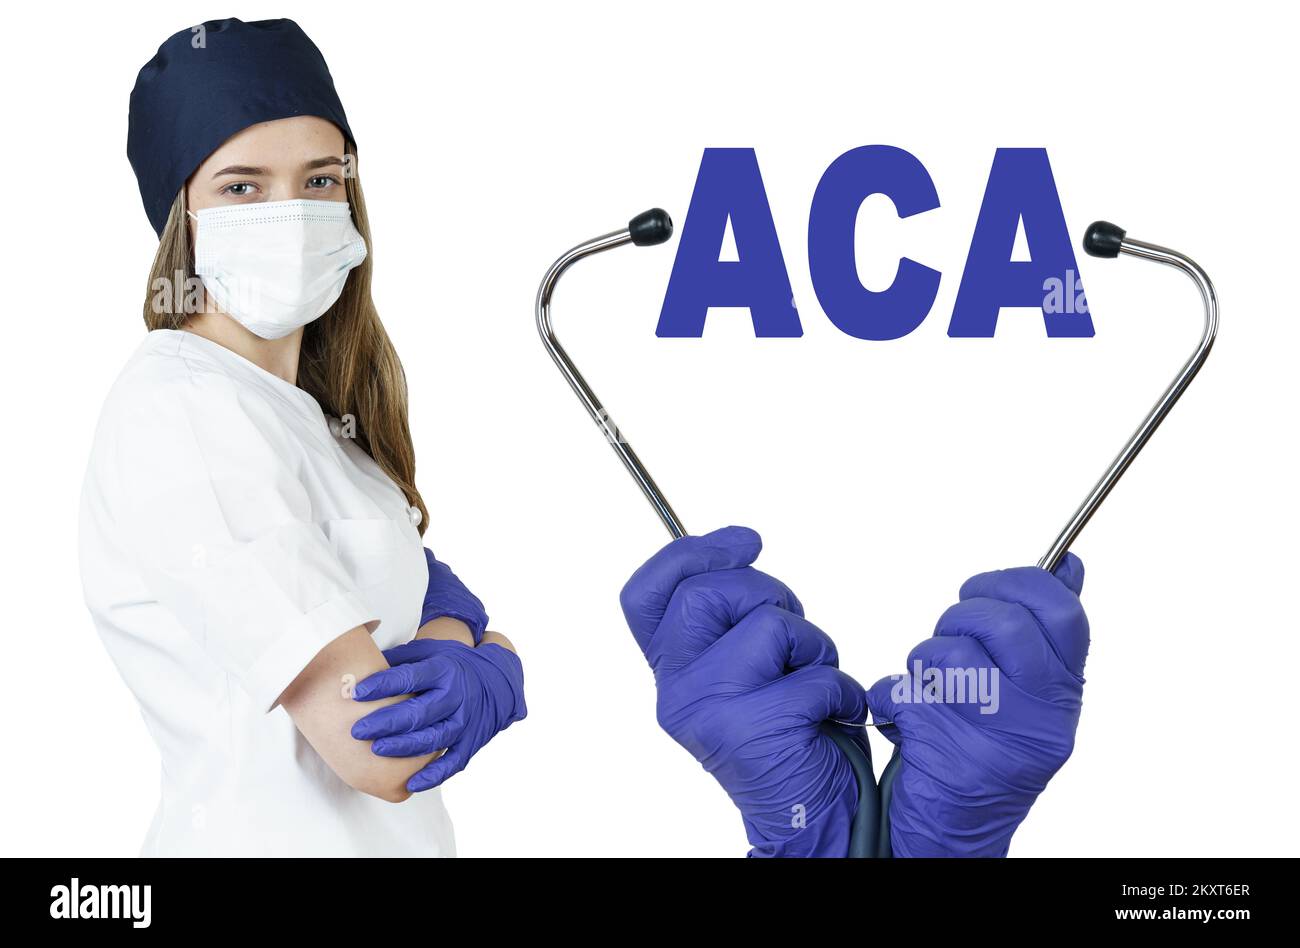 Health care and medicine concept. The doctor is holding a stethoscope, in the middle there is a text - ACA. AFFORDABLE CARE ACT. Stock Photo